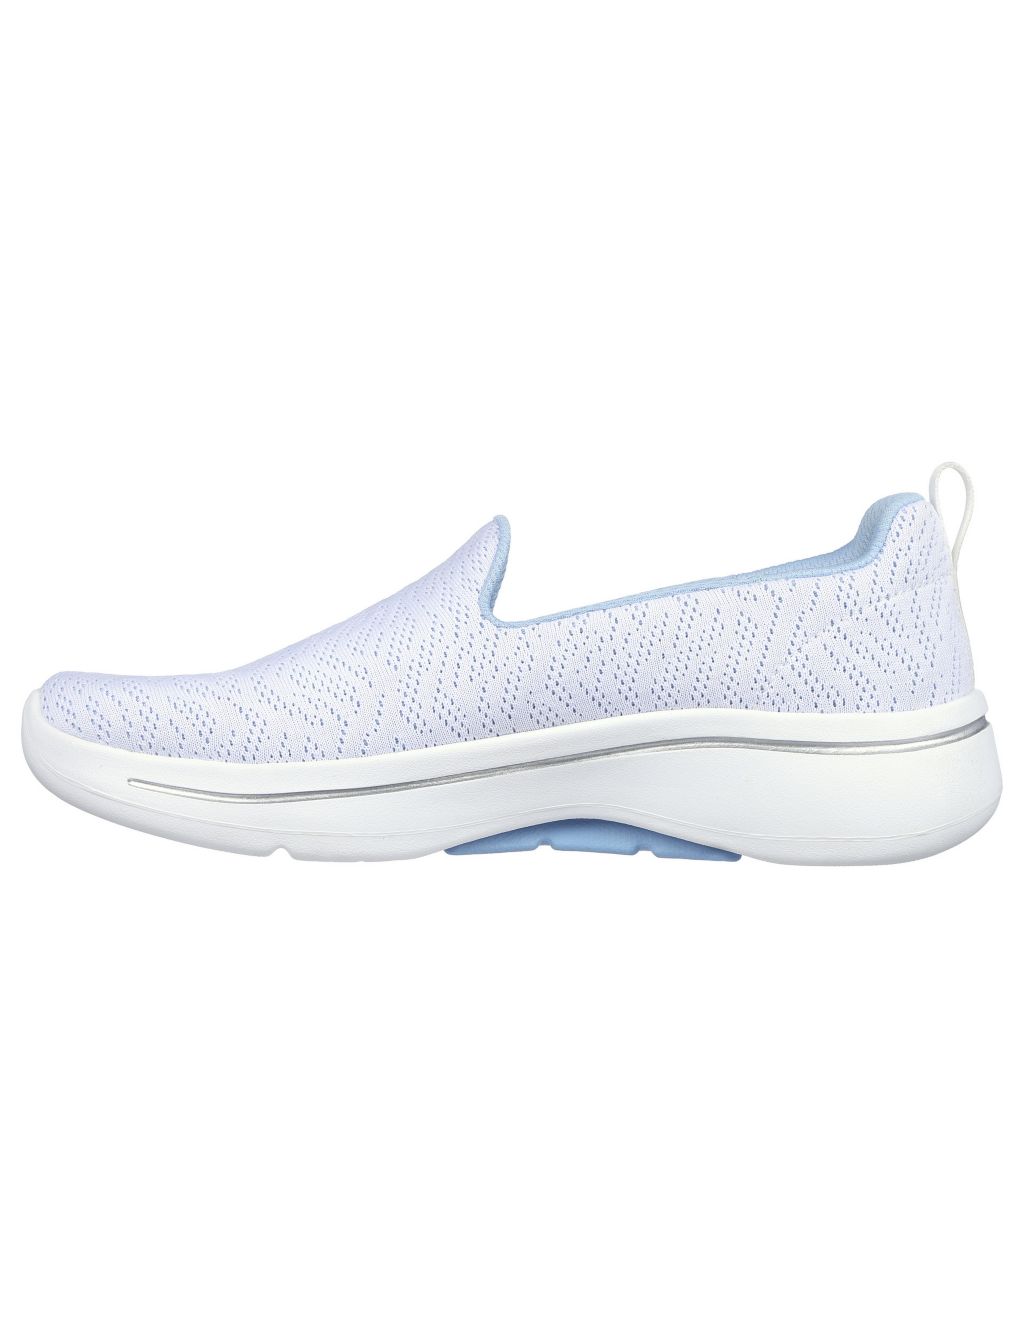 GOwalk Arch Fit Ocean Reef Knitted Trainers | Skechers | M&S